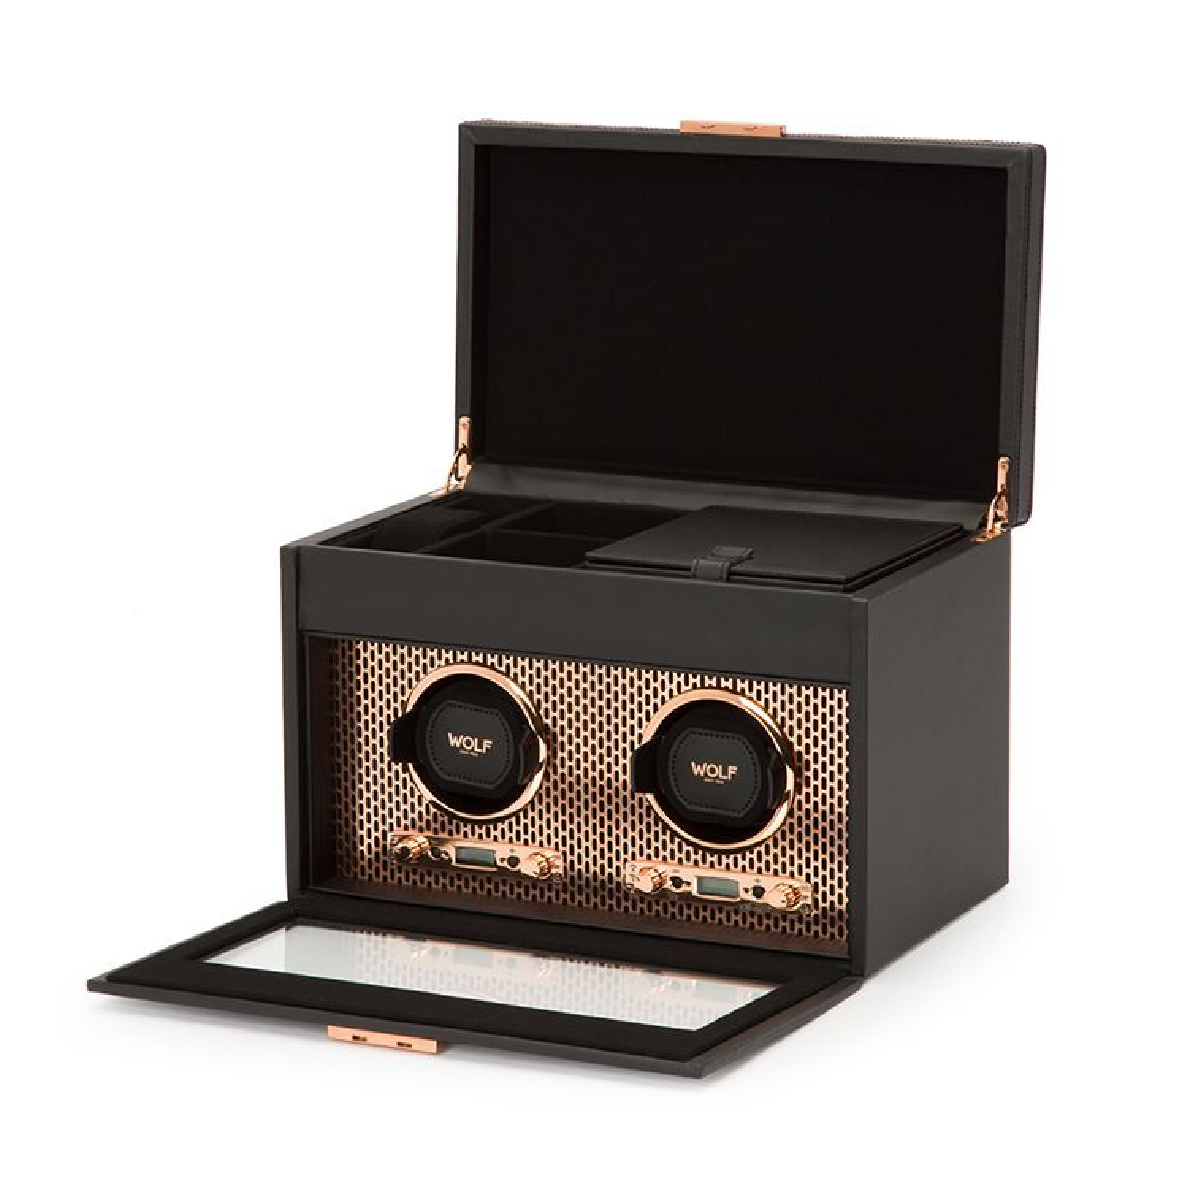 WOLF - Axis Copper Double Watch Winder & Storage w/ Cover